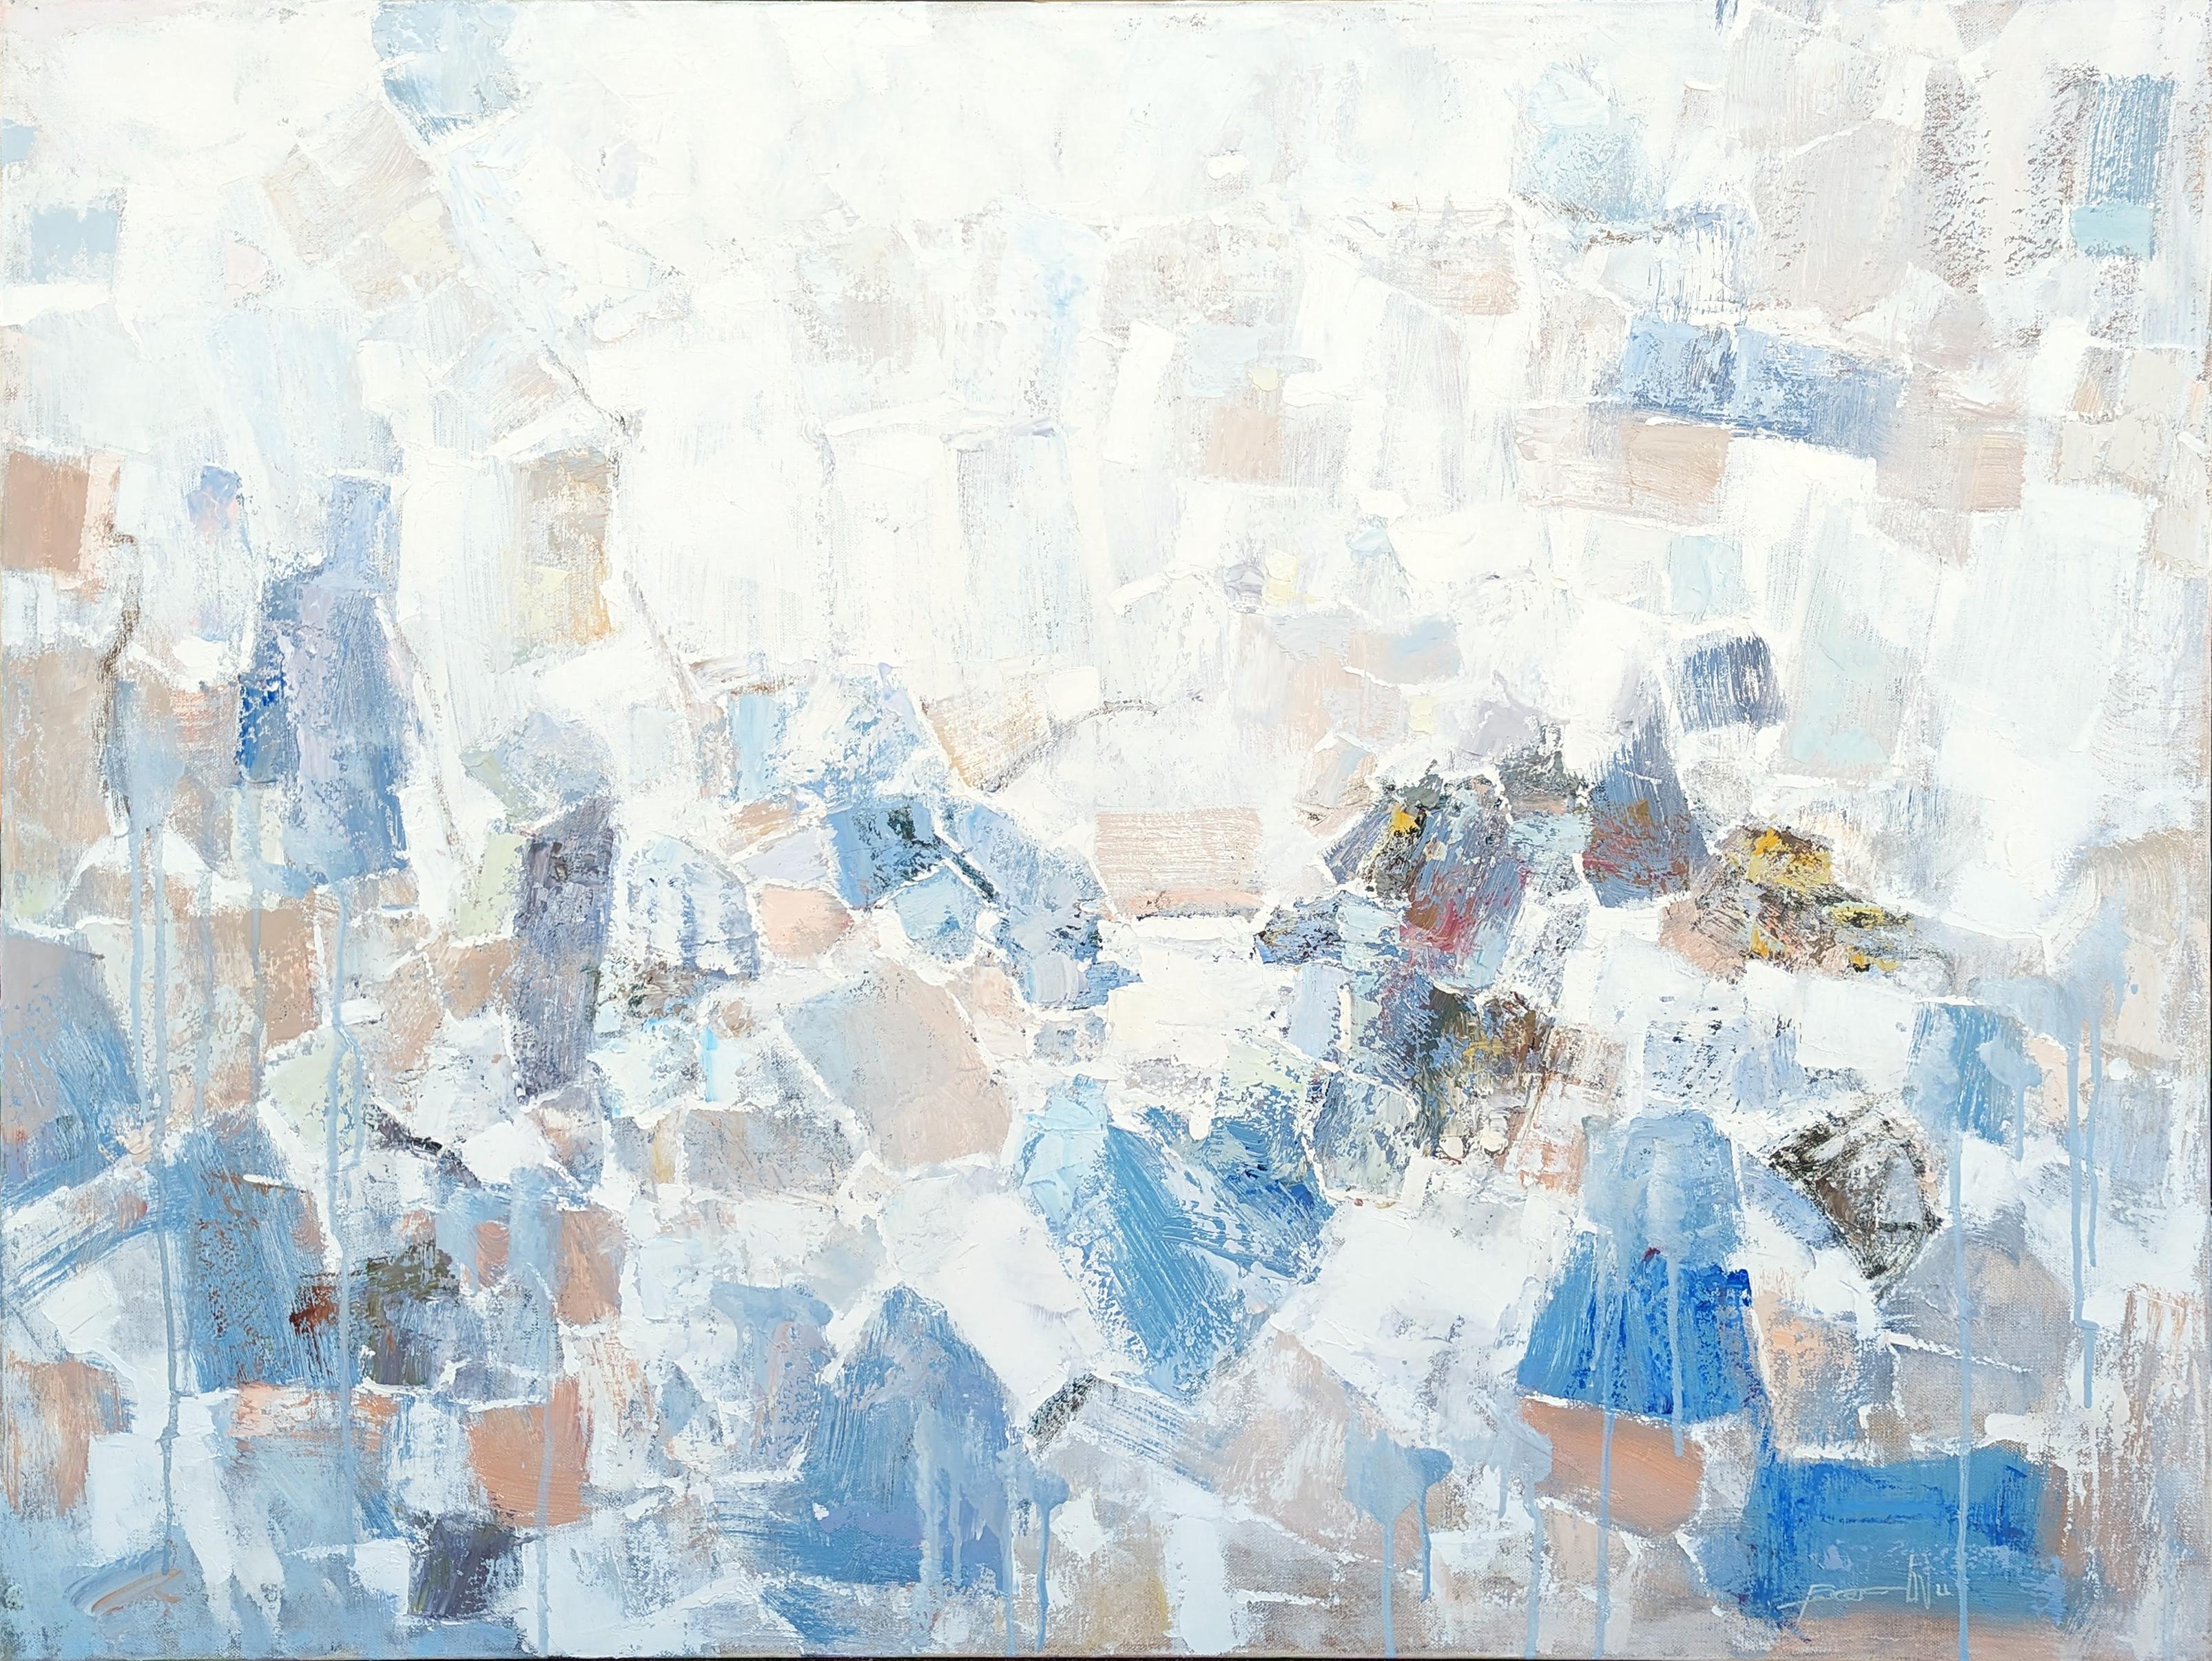 Abstract Painting Peter Wu - « Prayer on the Mount », grande peinture abstraite contemporaine aux tons pastel